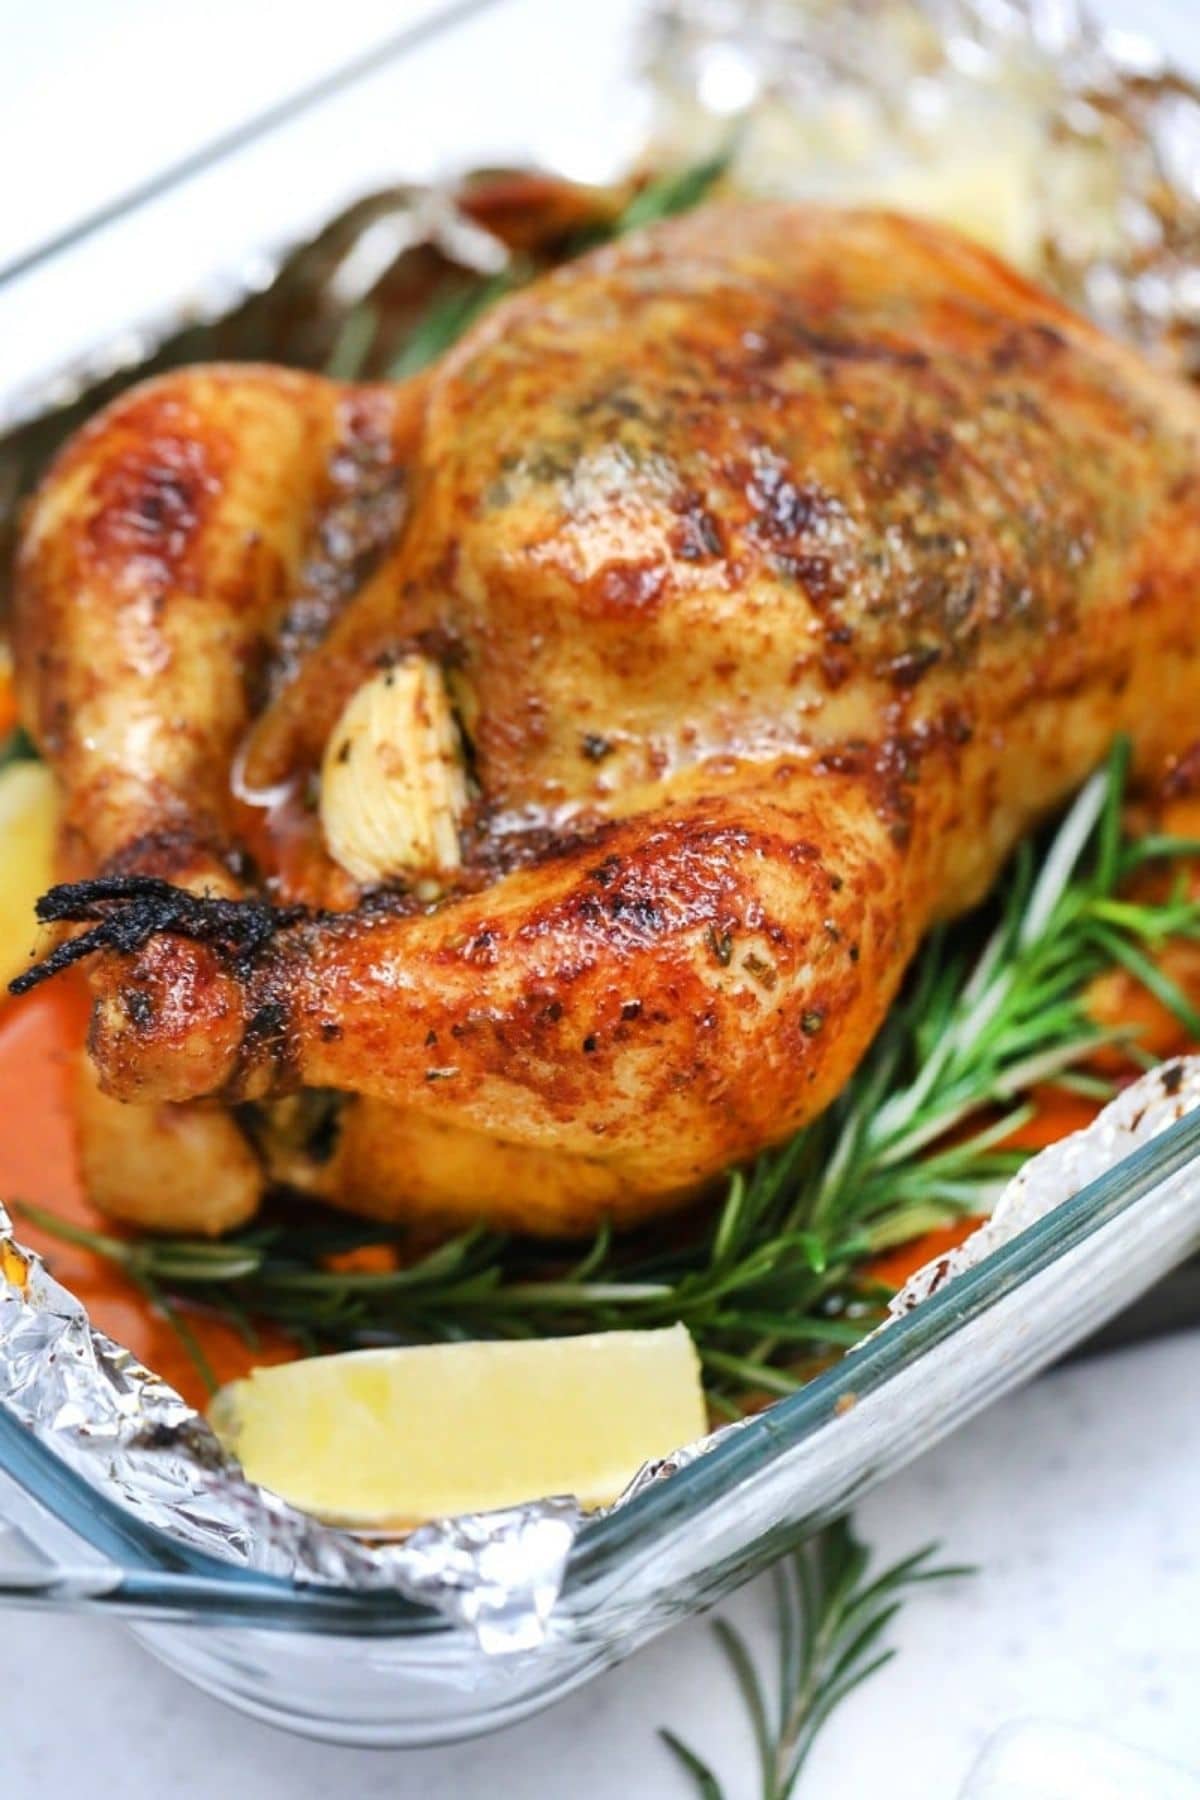 roasted chicken in silver platter with lemon wedge on side